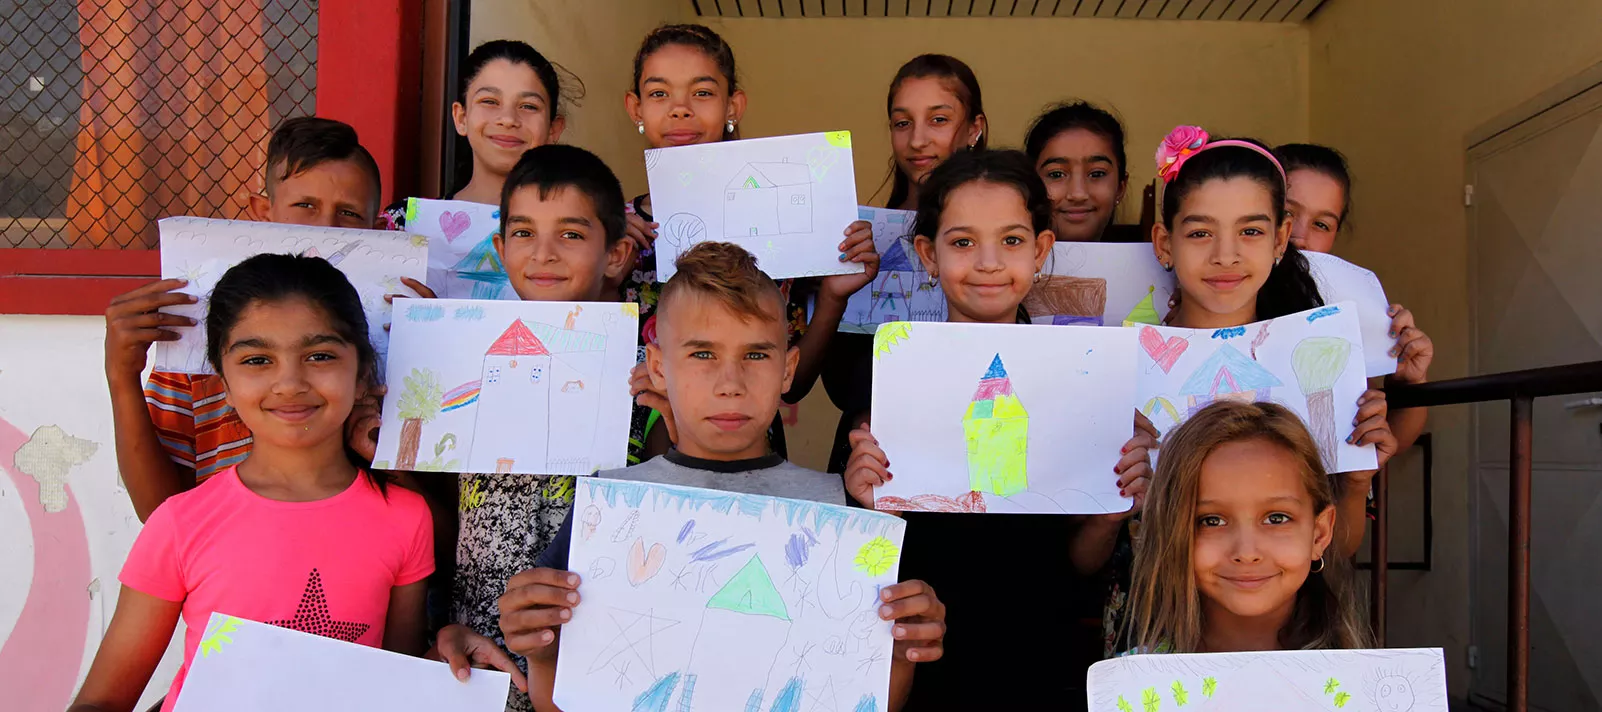 A group of children pose showing their drawings during educational activities held at UNICEF supported Child and Youth Zone, in Bulgaria, in November 2016. 